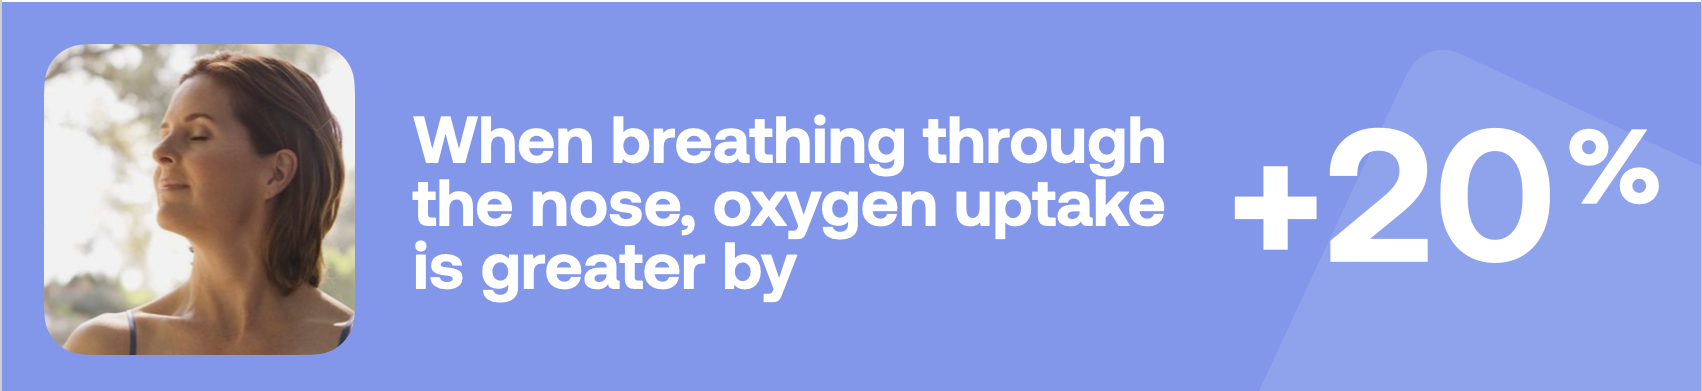 When breathing through the nose, oxygen uptake is greater by +20%